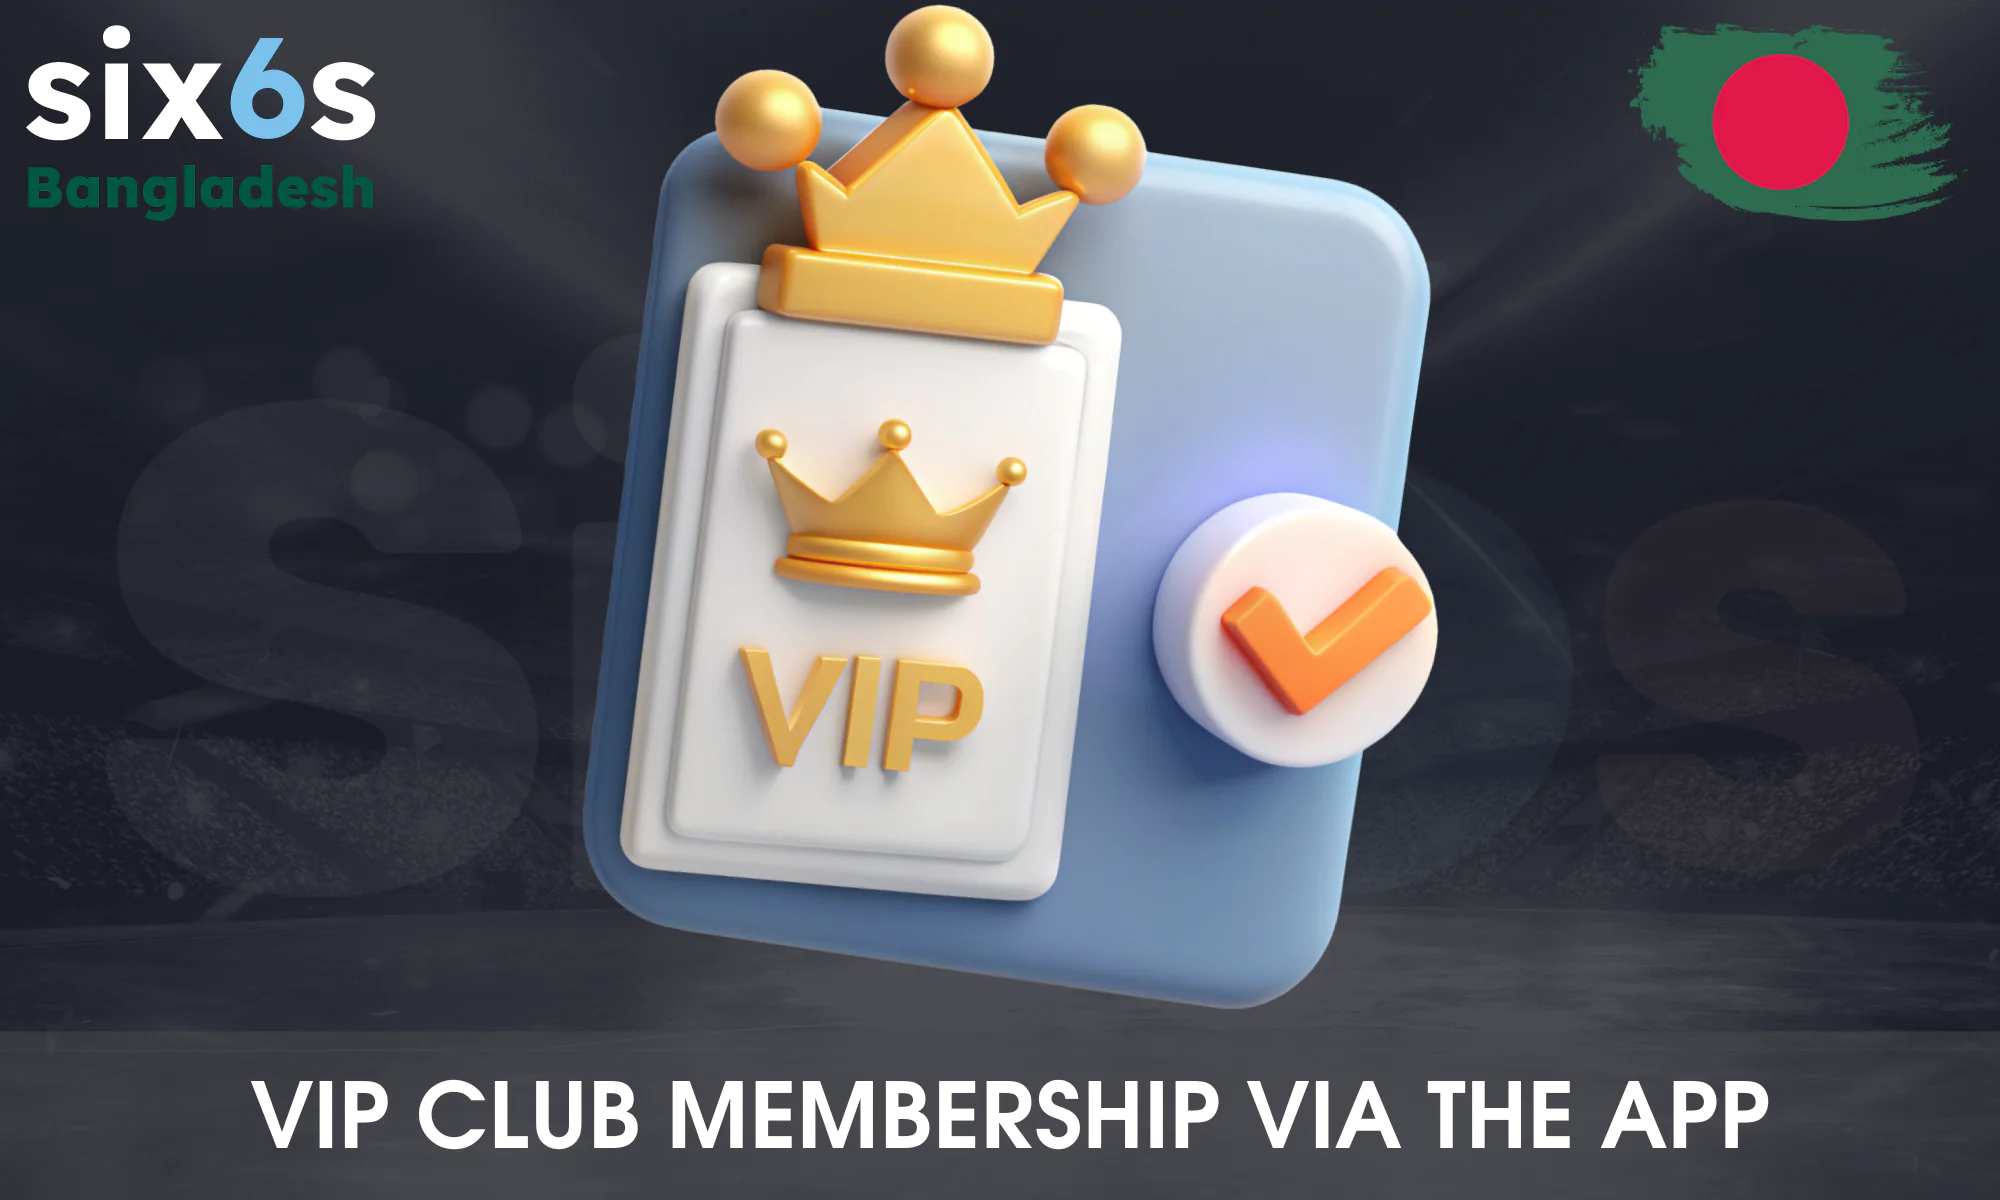 The Six6s VIP Club has five levels, each of which offers separate rewards and services for loyal players